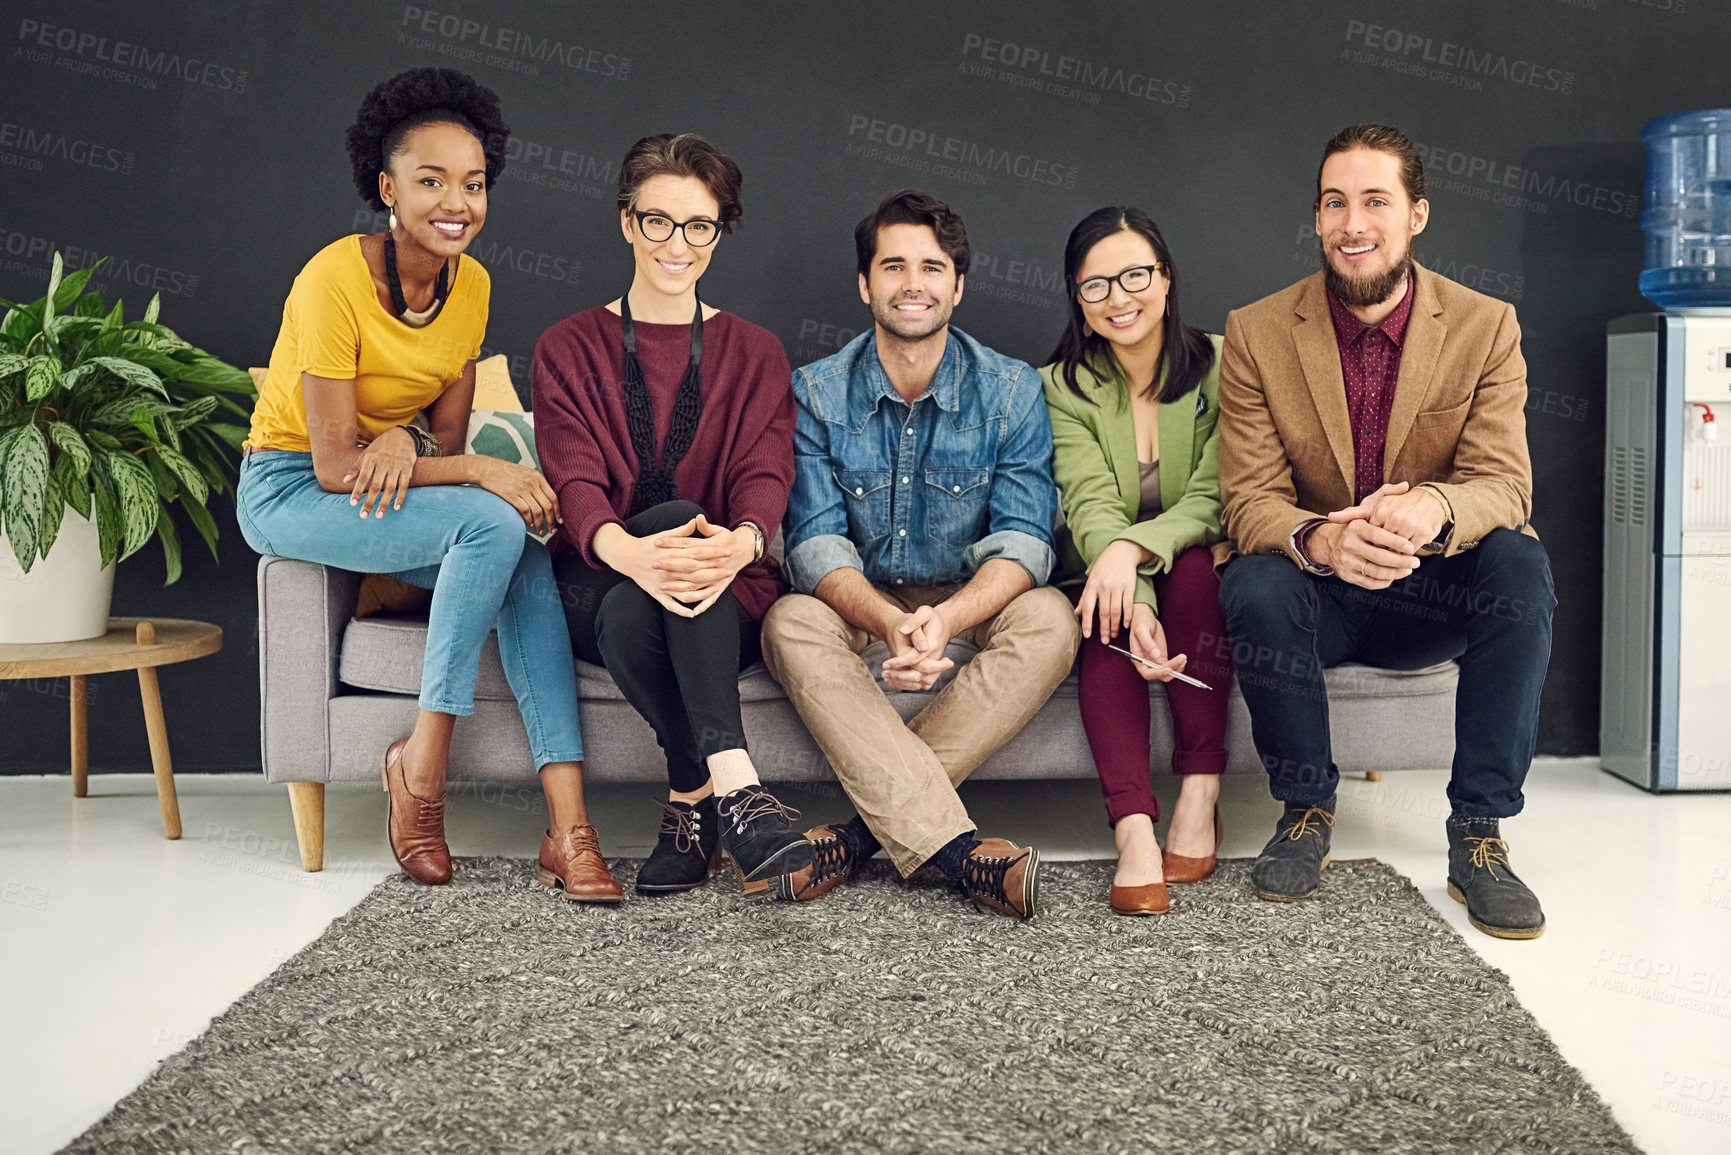 Buy stock photo Portrait of a group of young creatives sitting together on a couch in an office